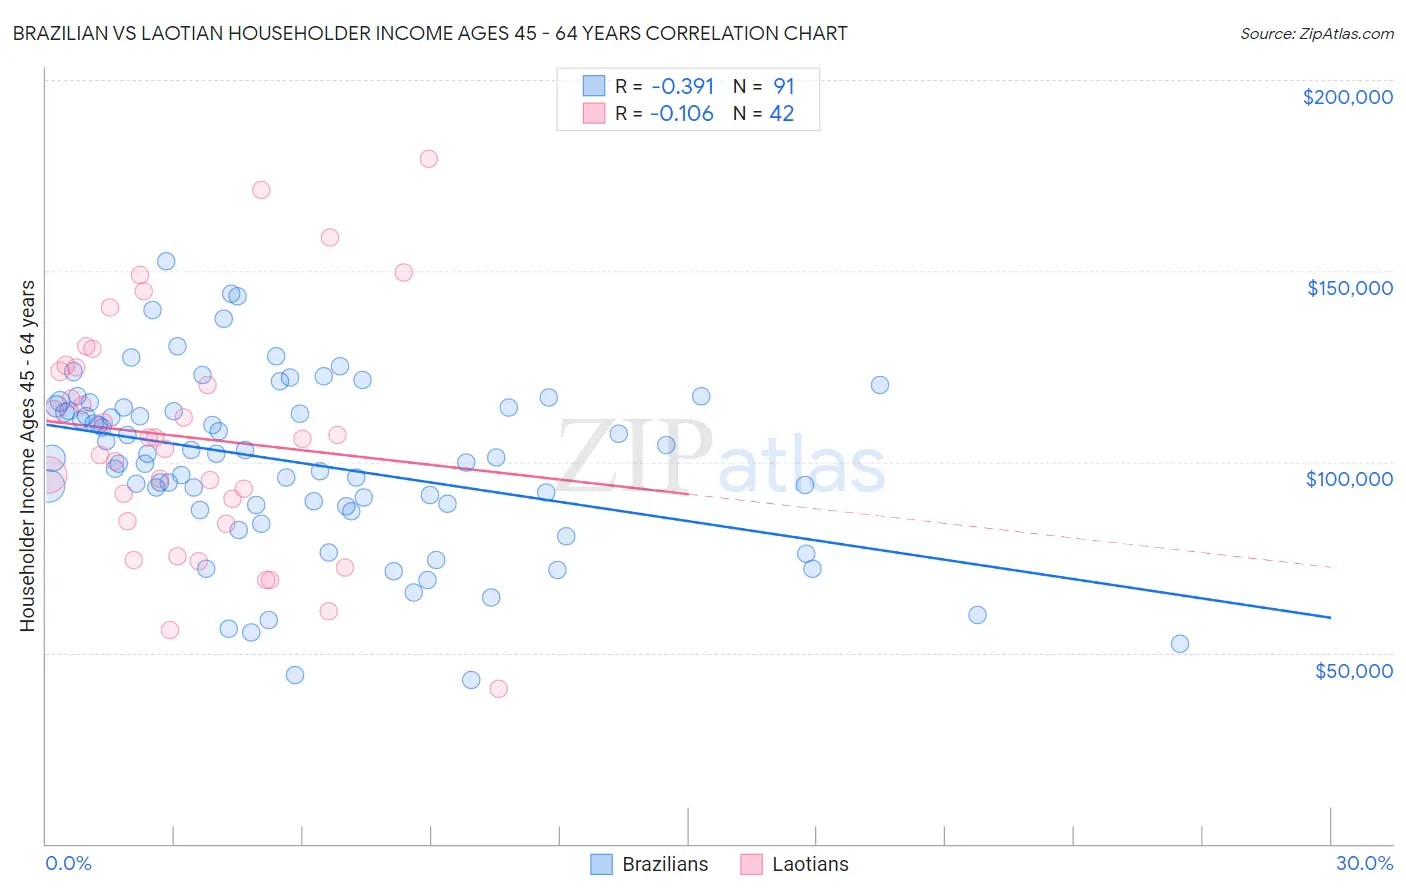 Brazilian vs Laotian Householder Income Ages 45 - 64 years